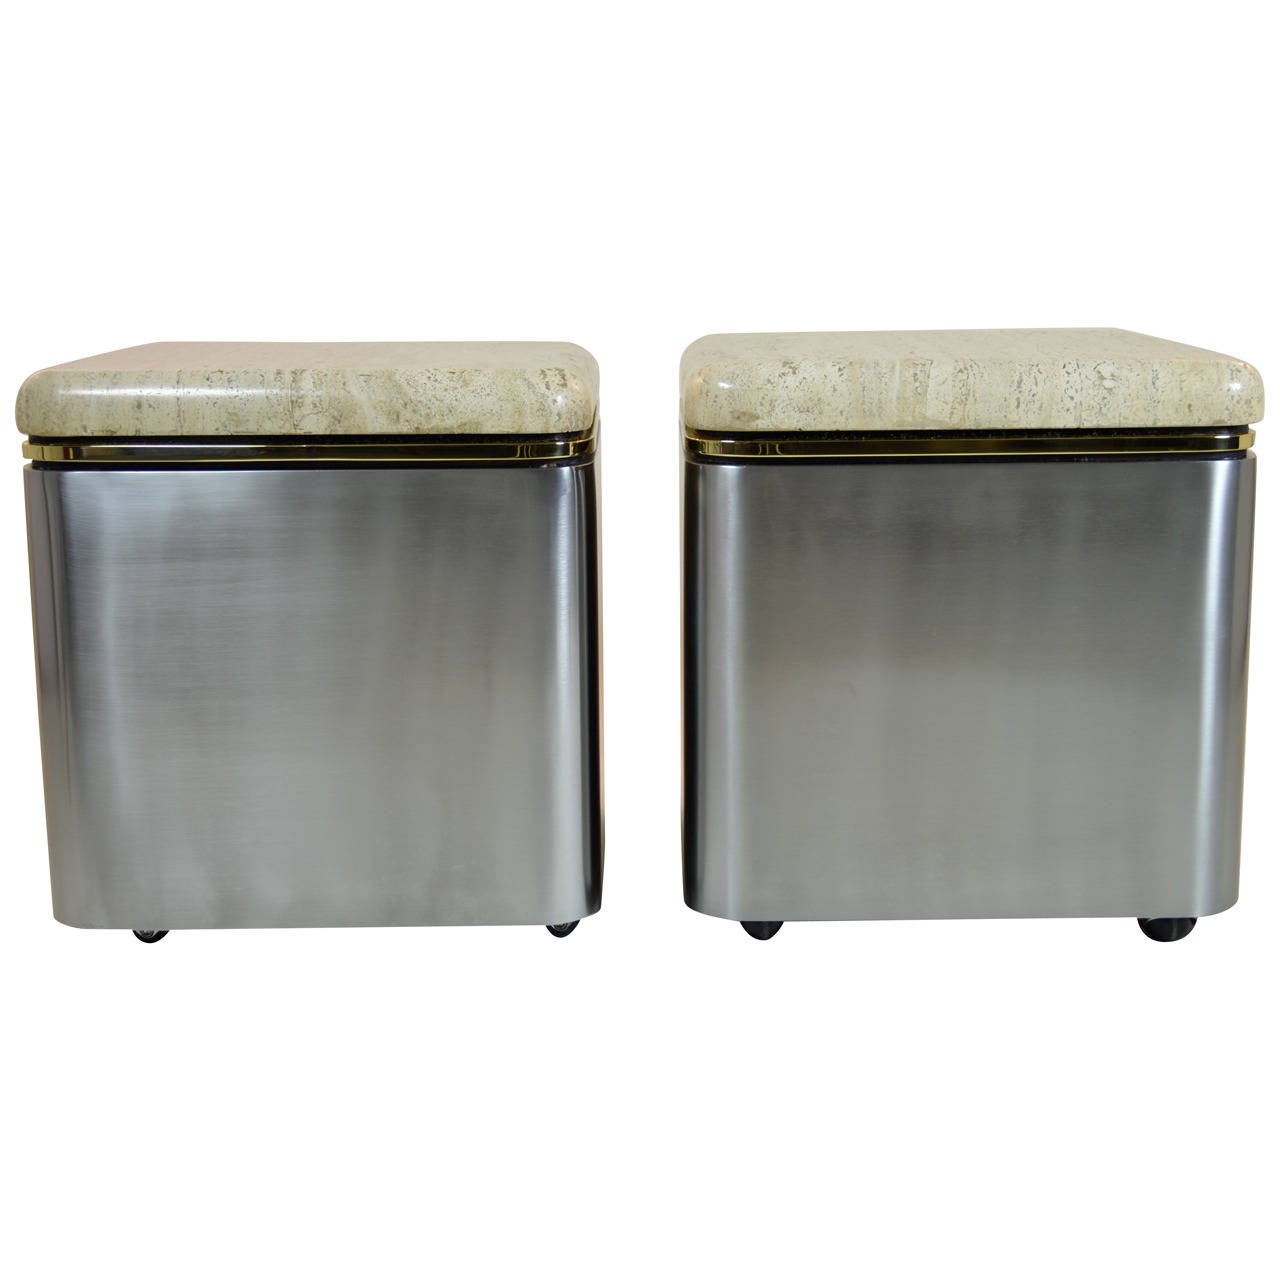 With elegant brass detail, satin steel and super thick travertine marble tops. Newly polished. Very fine quality. Each table is on heavy rubber casters and moves very smoothly.